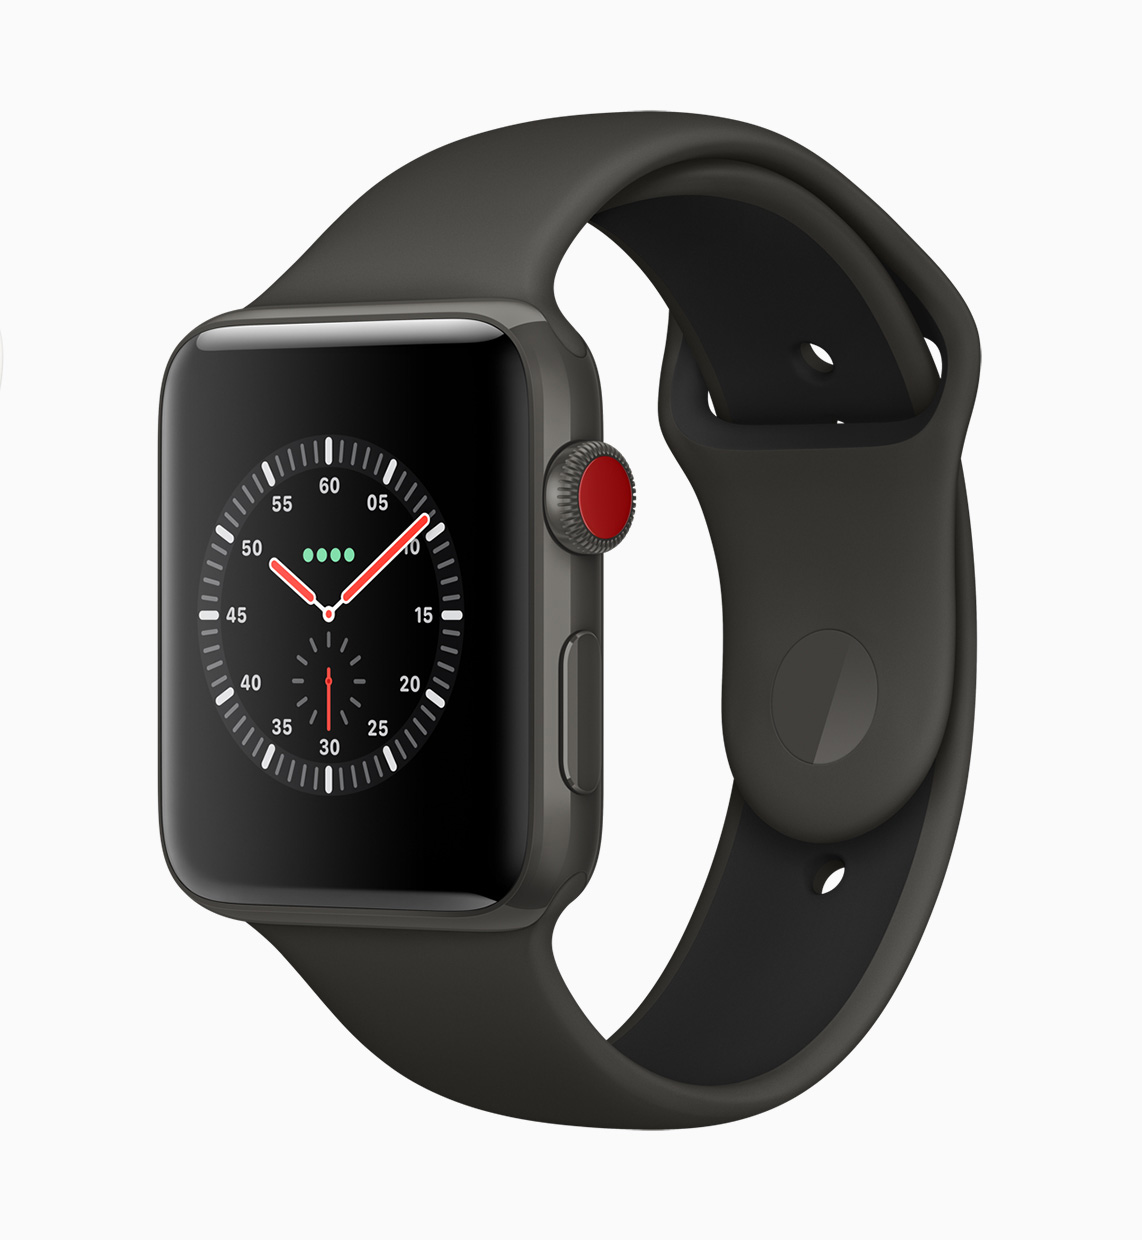 Apple Watch Series 3 features builtin cellular and more Apple